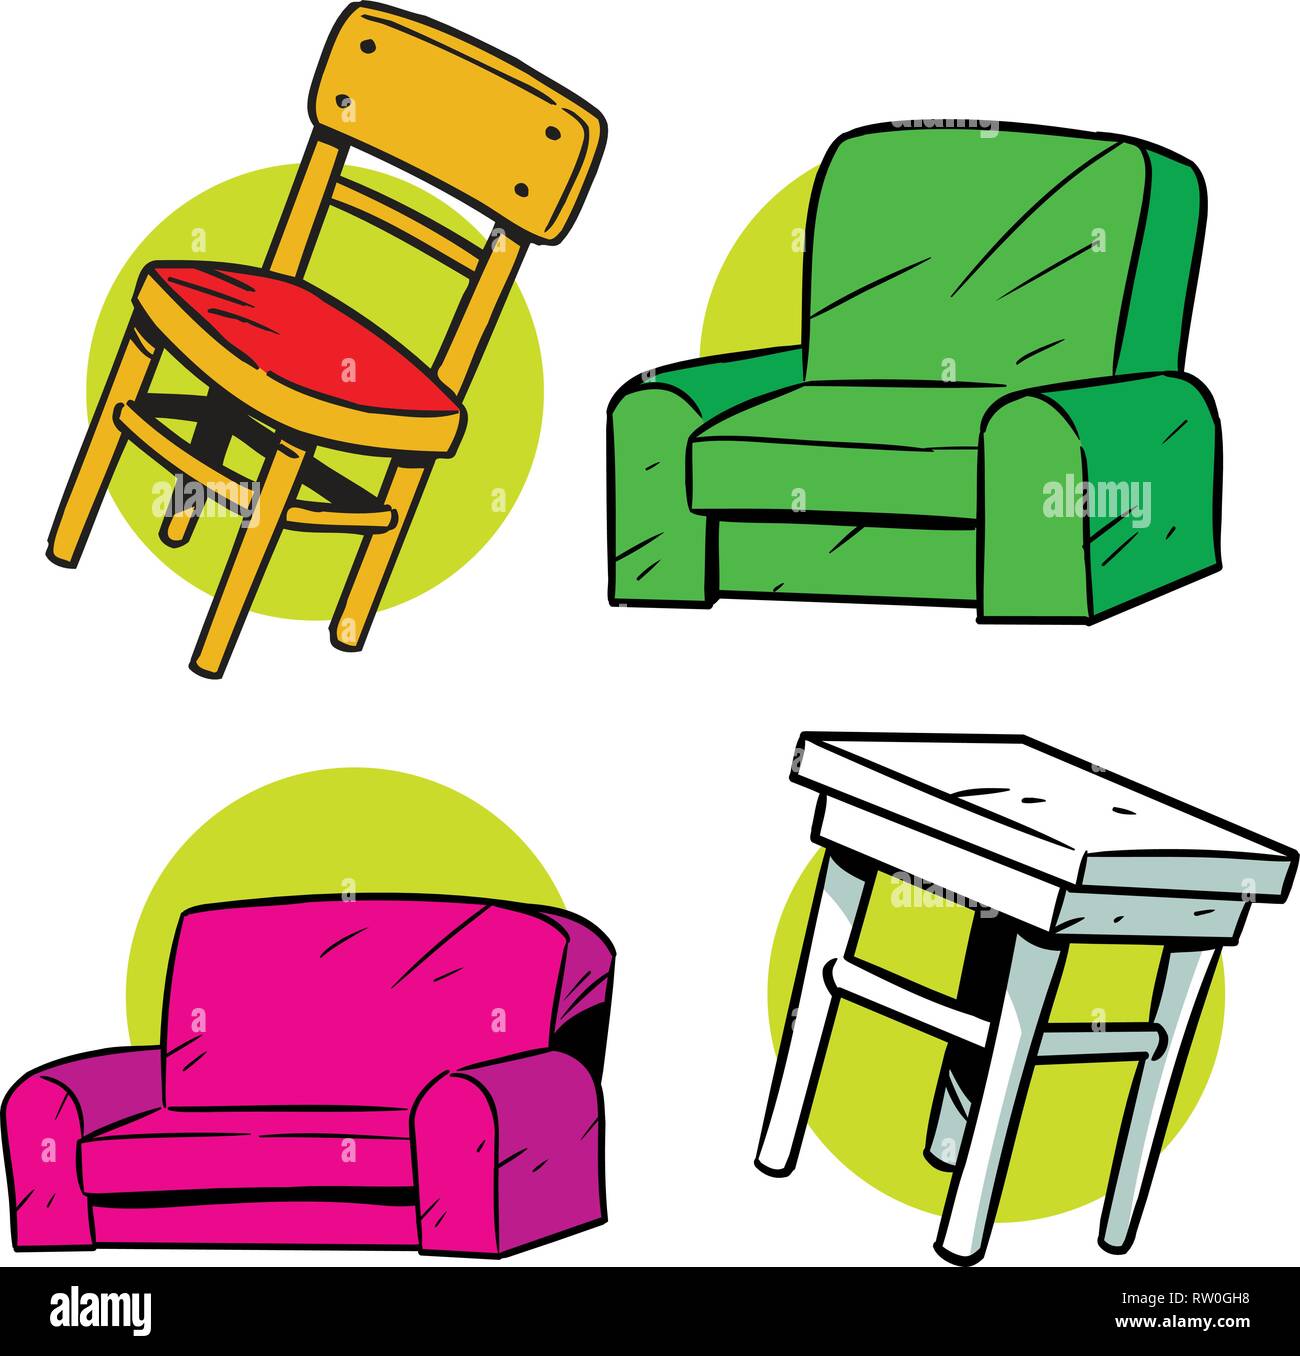 The illustration shows several items furniture. Illustration is presented in cartoon style on separate layers. Stock Vector